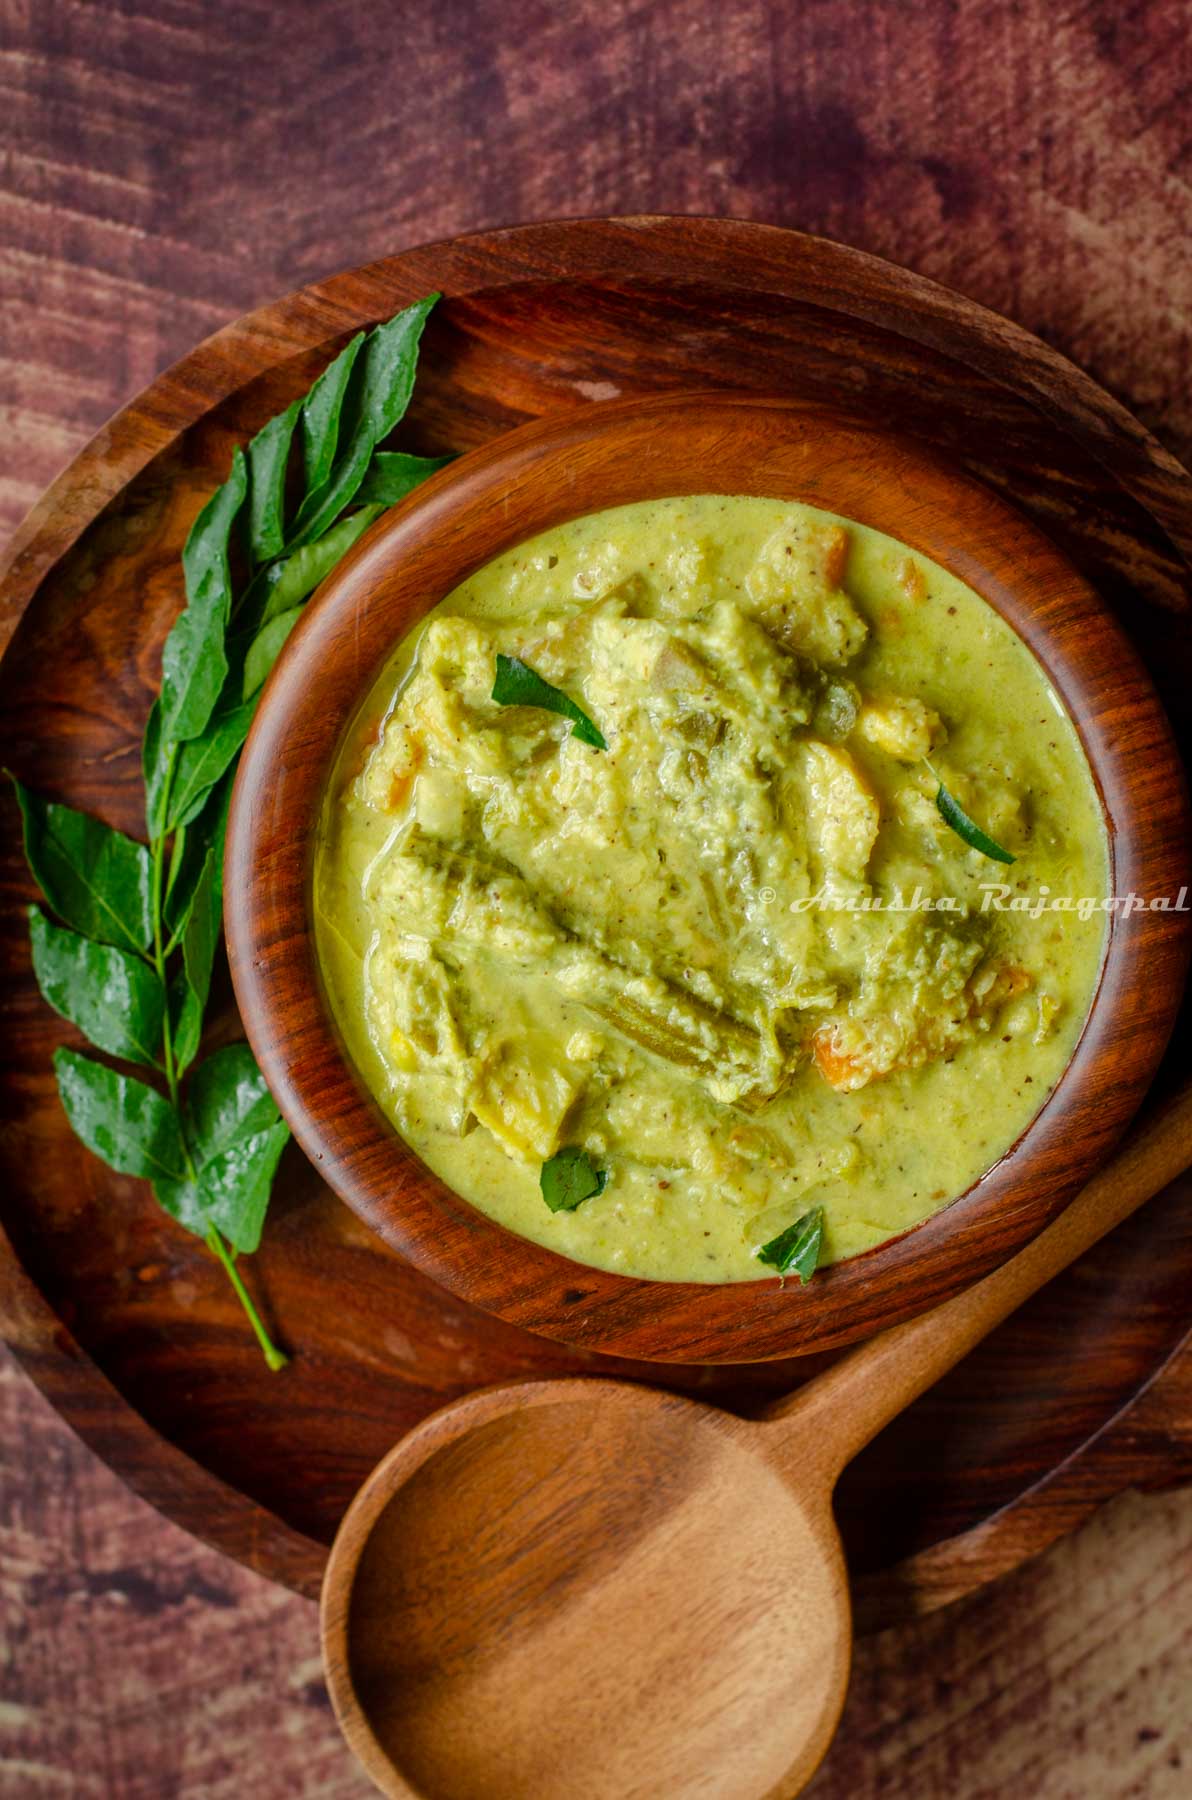 Kerala aviyal served in a wooden bowl placed over a wooden platter. A serving ladle and a sprig of curry leaves placed around the bowl.